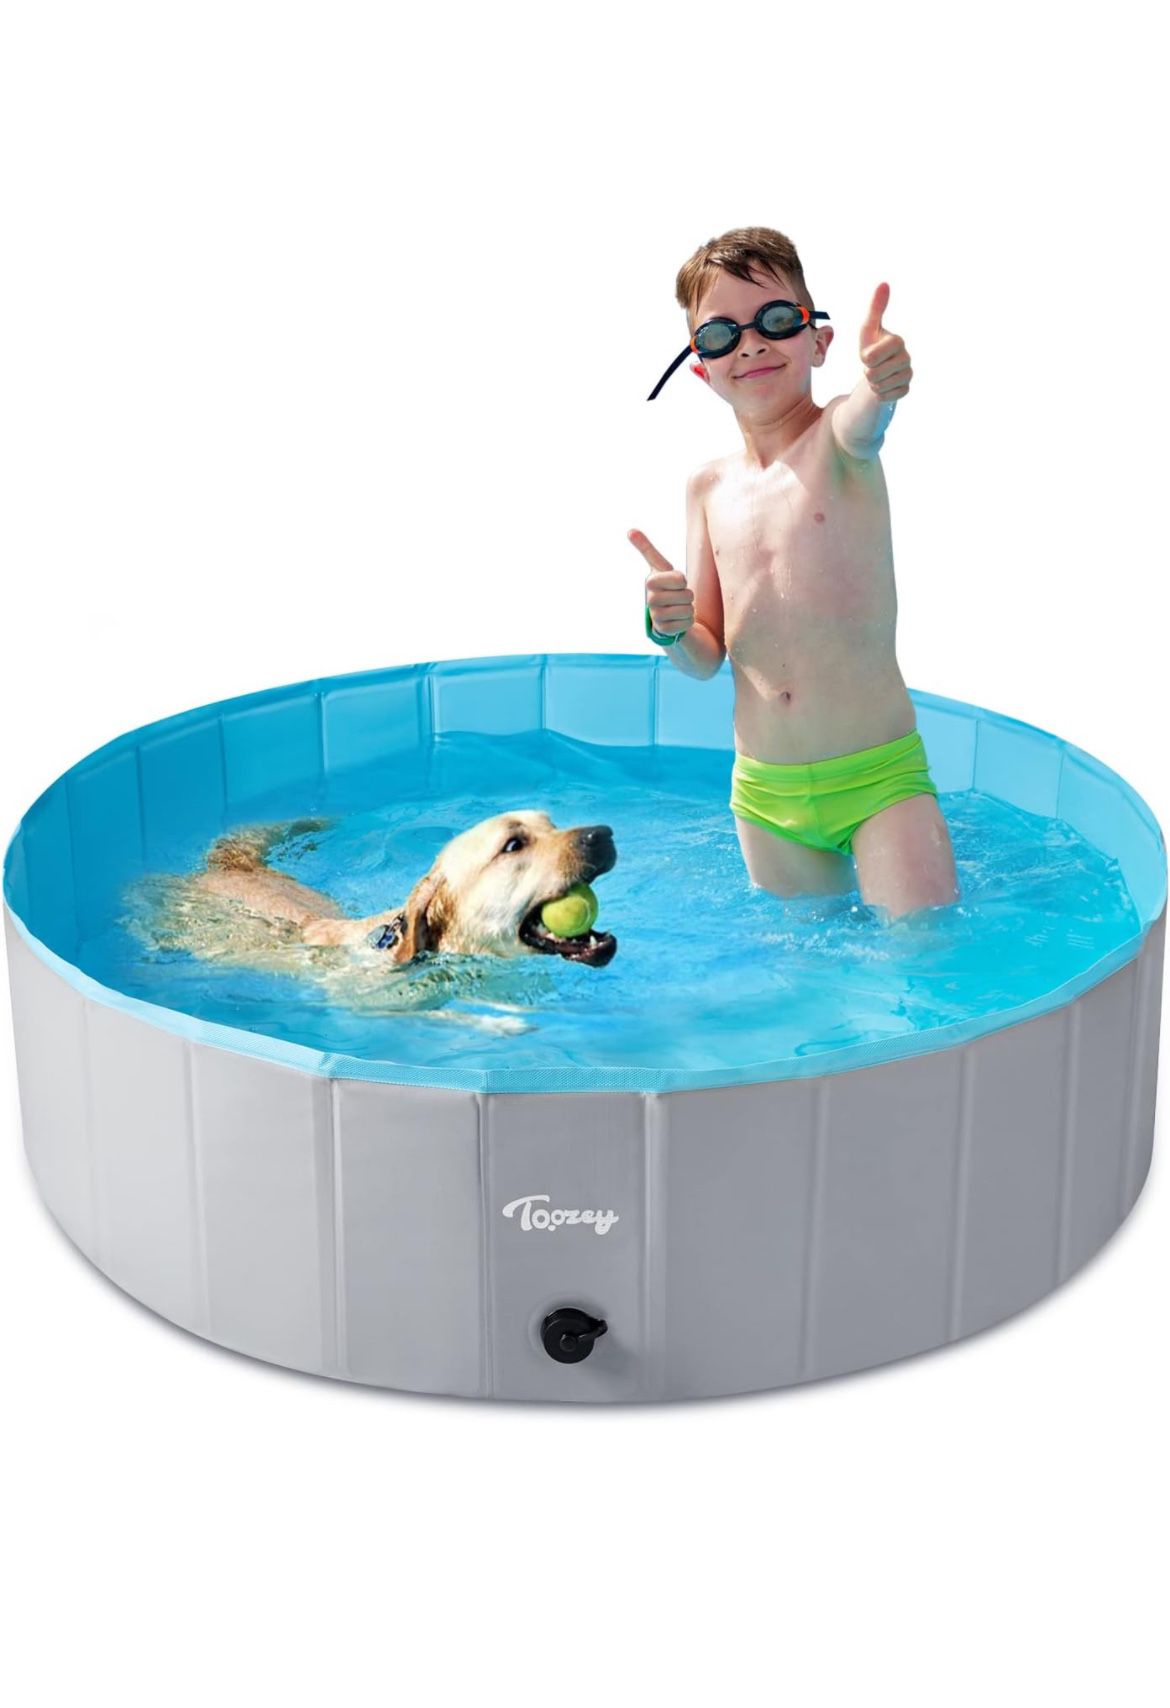 Toozey High Durability Dog Pool Foldable Hard Plastic Swimming Pool Collapsible Dog Bath Tub Outside Kiddle Pool Portable Pool for Puppy Small Medium 